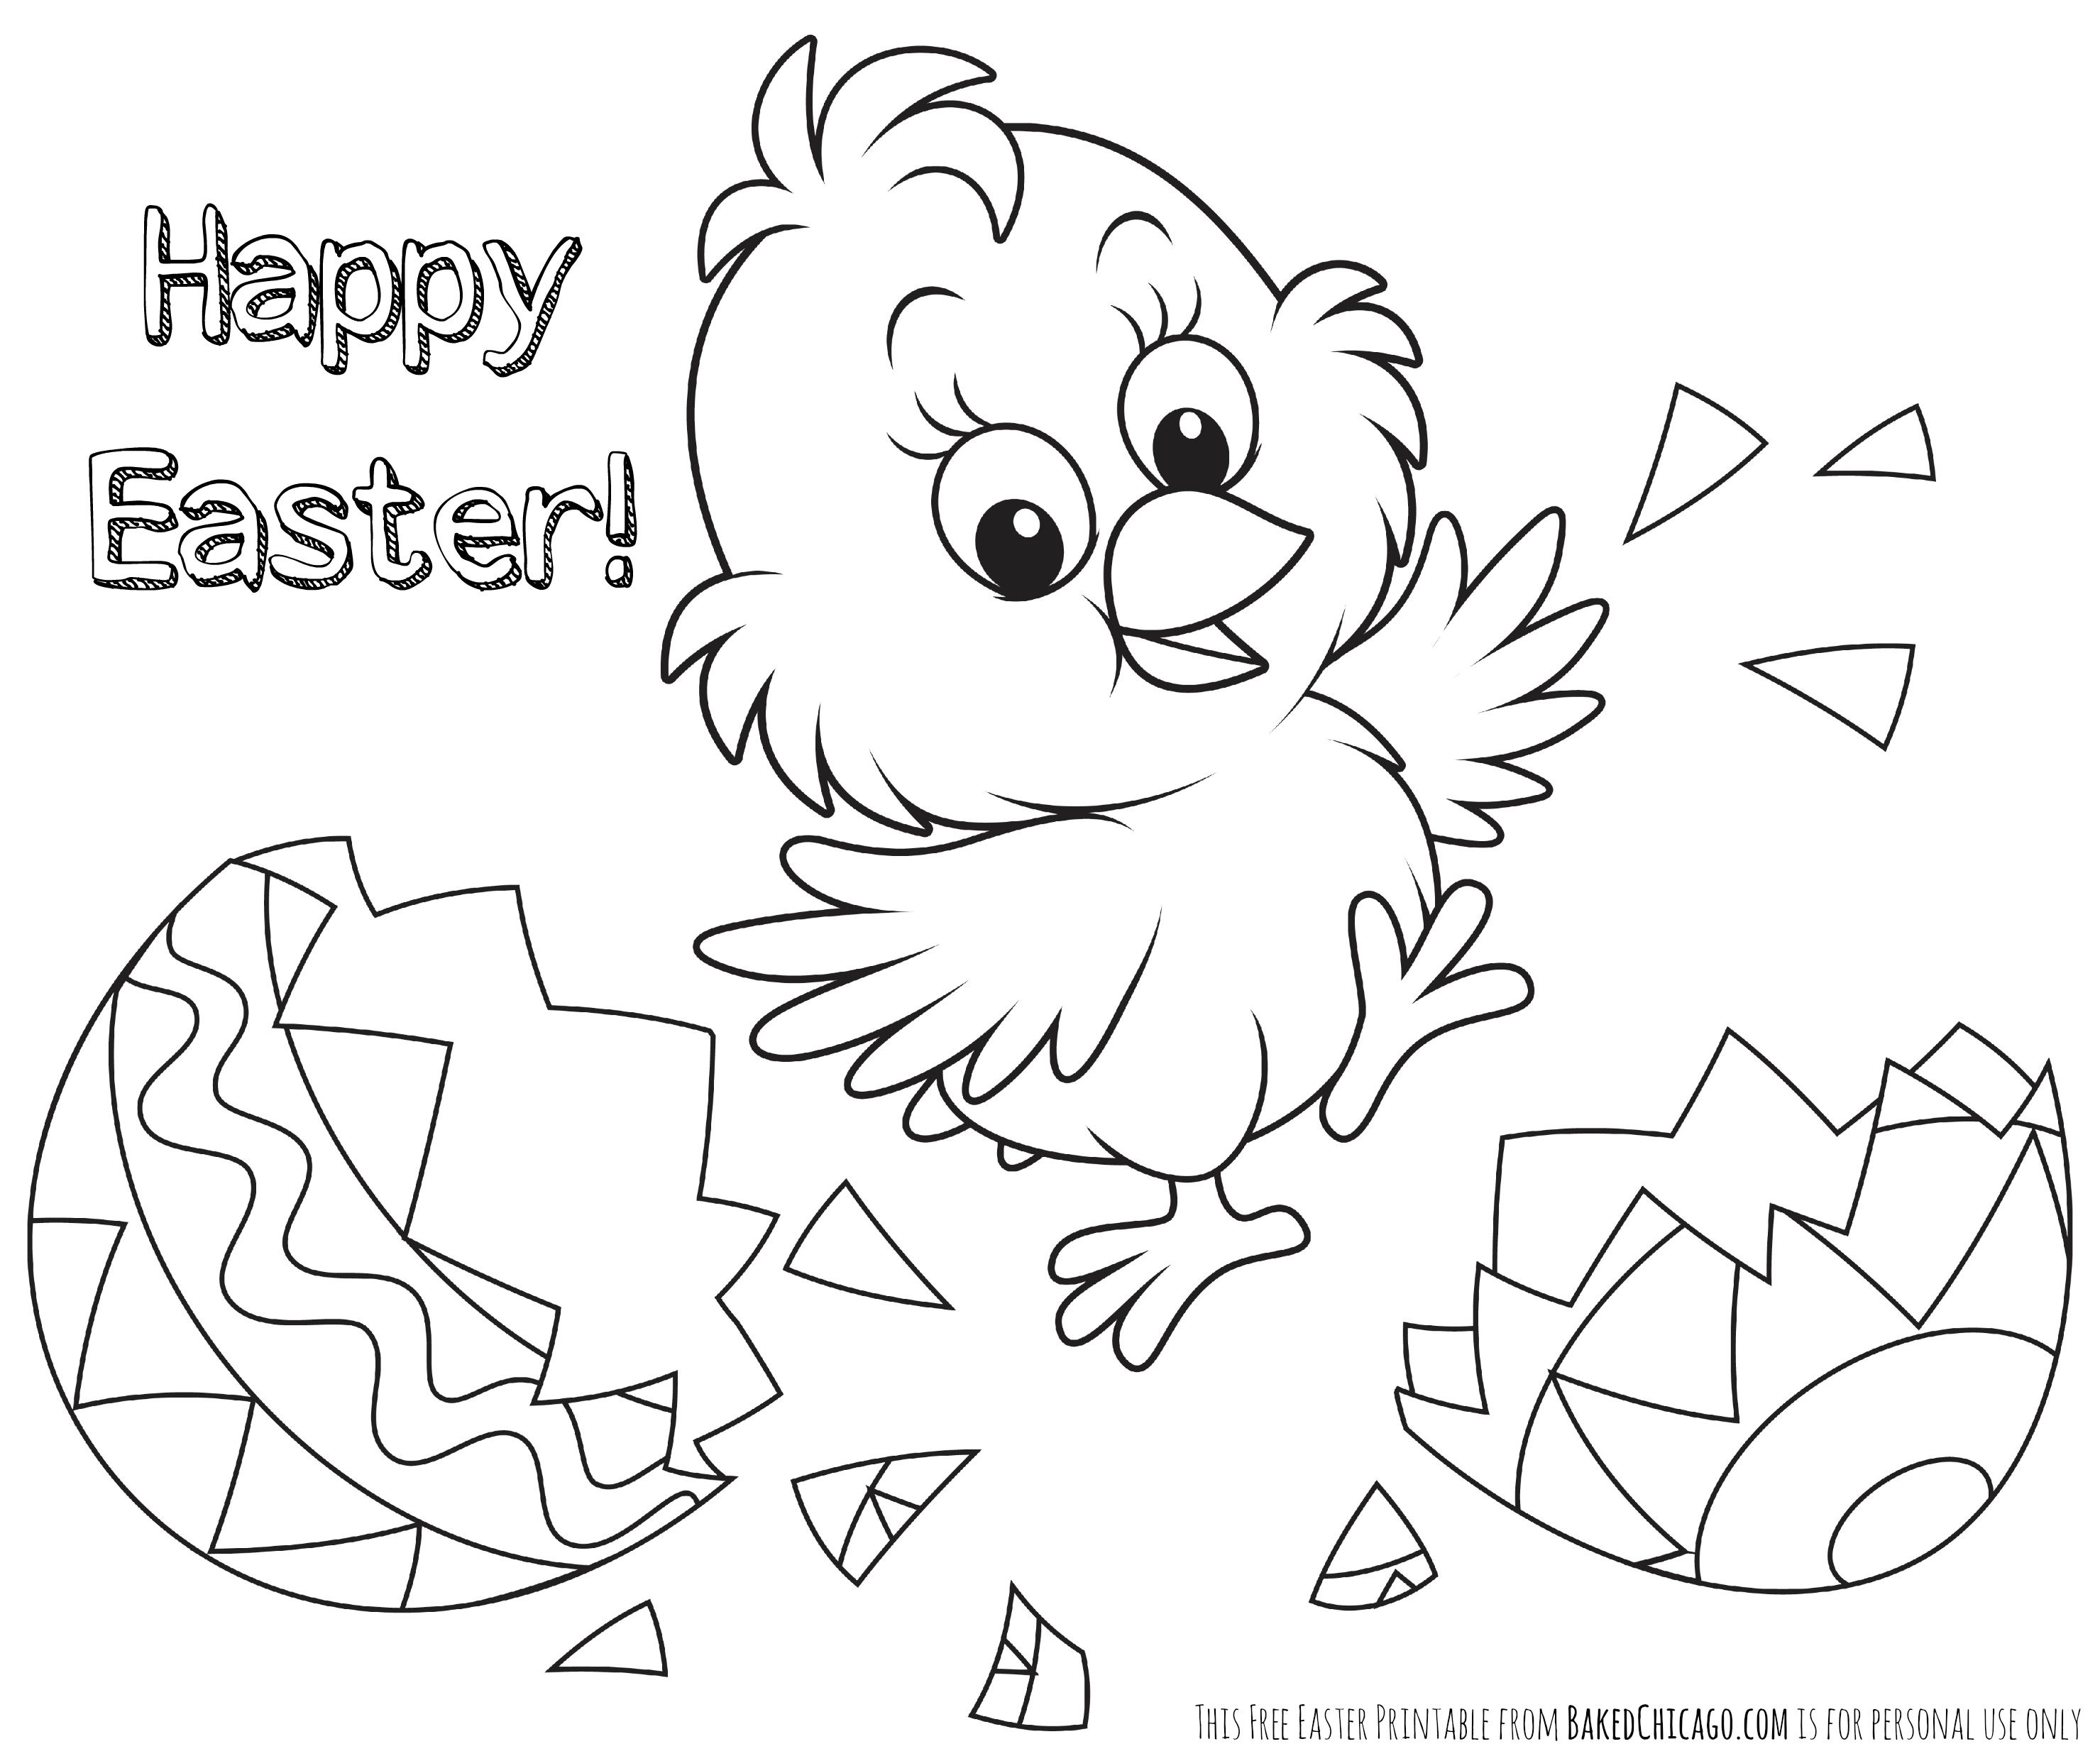 Easter Coloring Pages Printable Bloodbrothers Me Colouring Sheets - Free Printable Easter Colouring Sheets